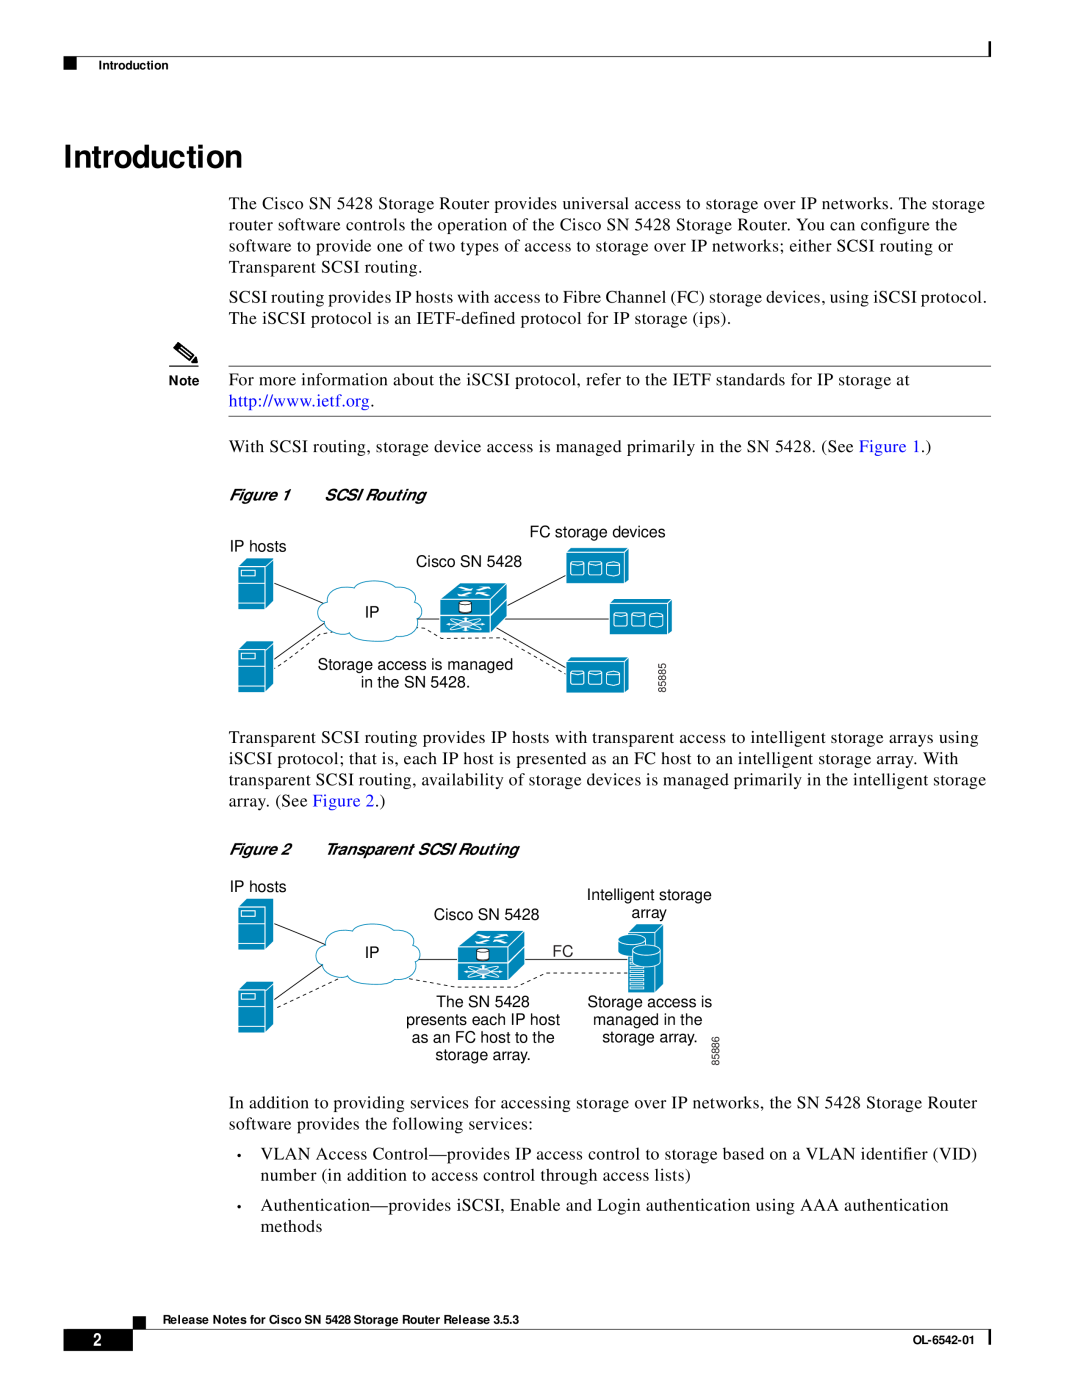 Cisco Systems SN 5428 manual Introduction, Transparent SCSI Routing 